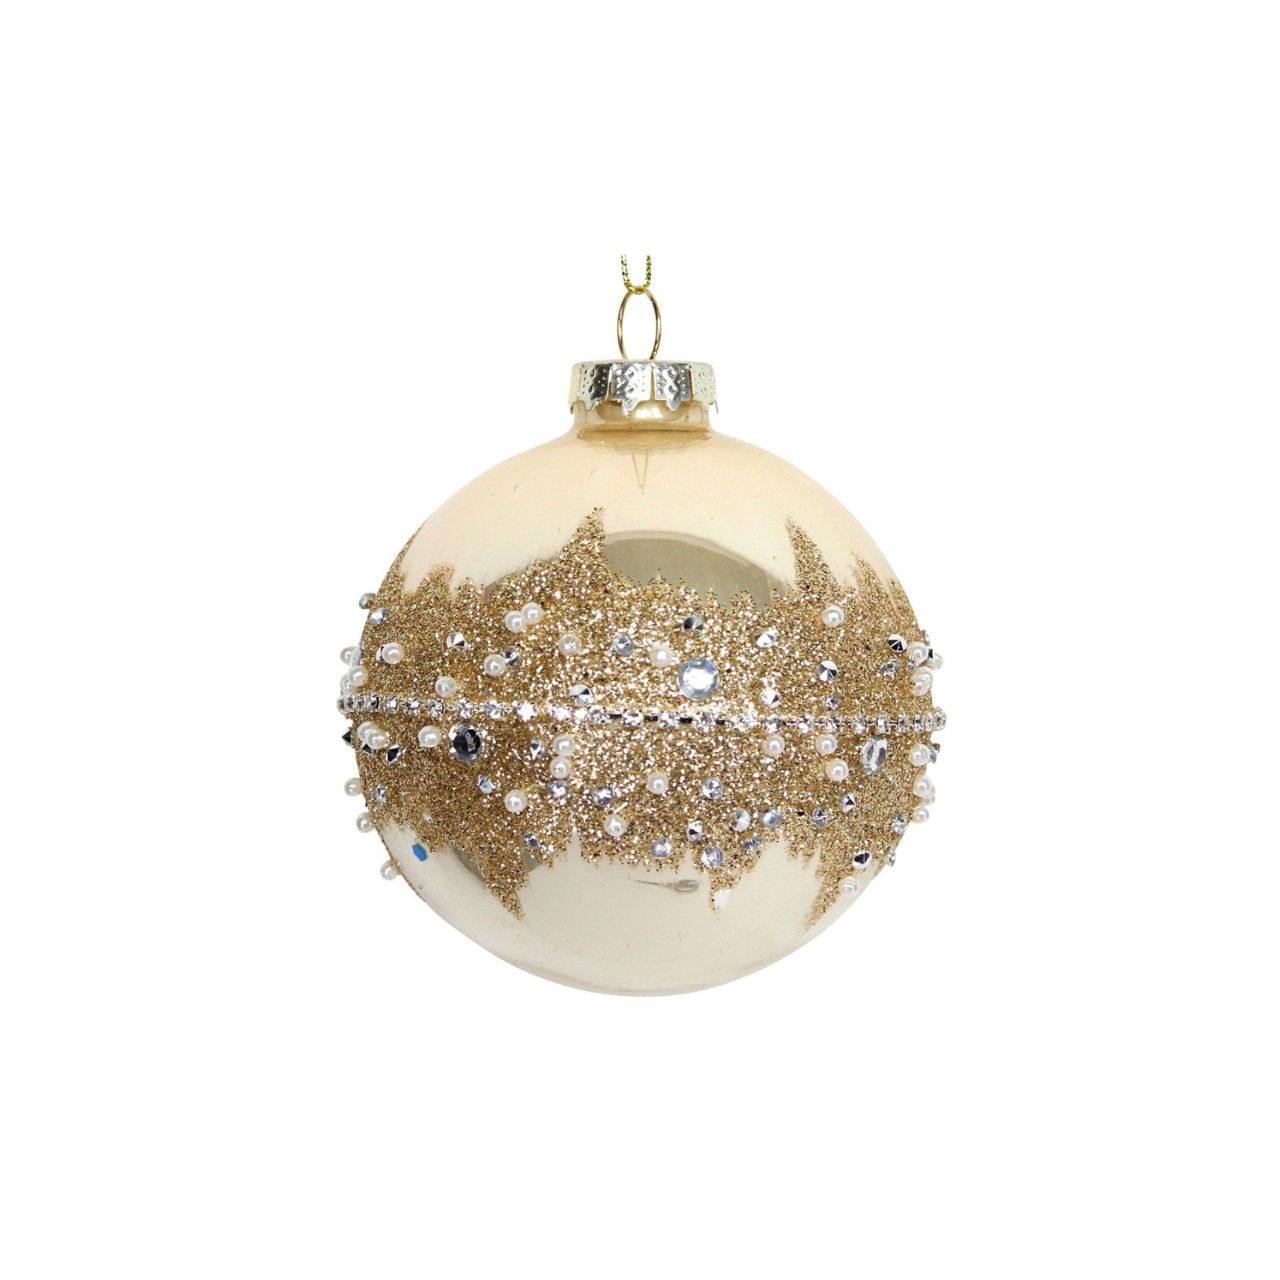 Gisela Graham Christmas Bauble Gold With Diamante Glitter Band  Browse our beautiful range of luxury Christmas tree decorations, baubles & ornaments for your tree this Christmas.